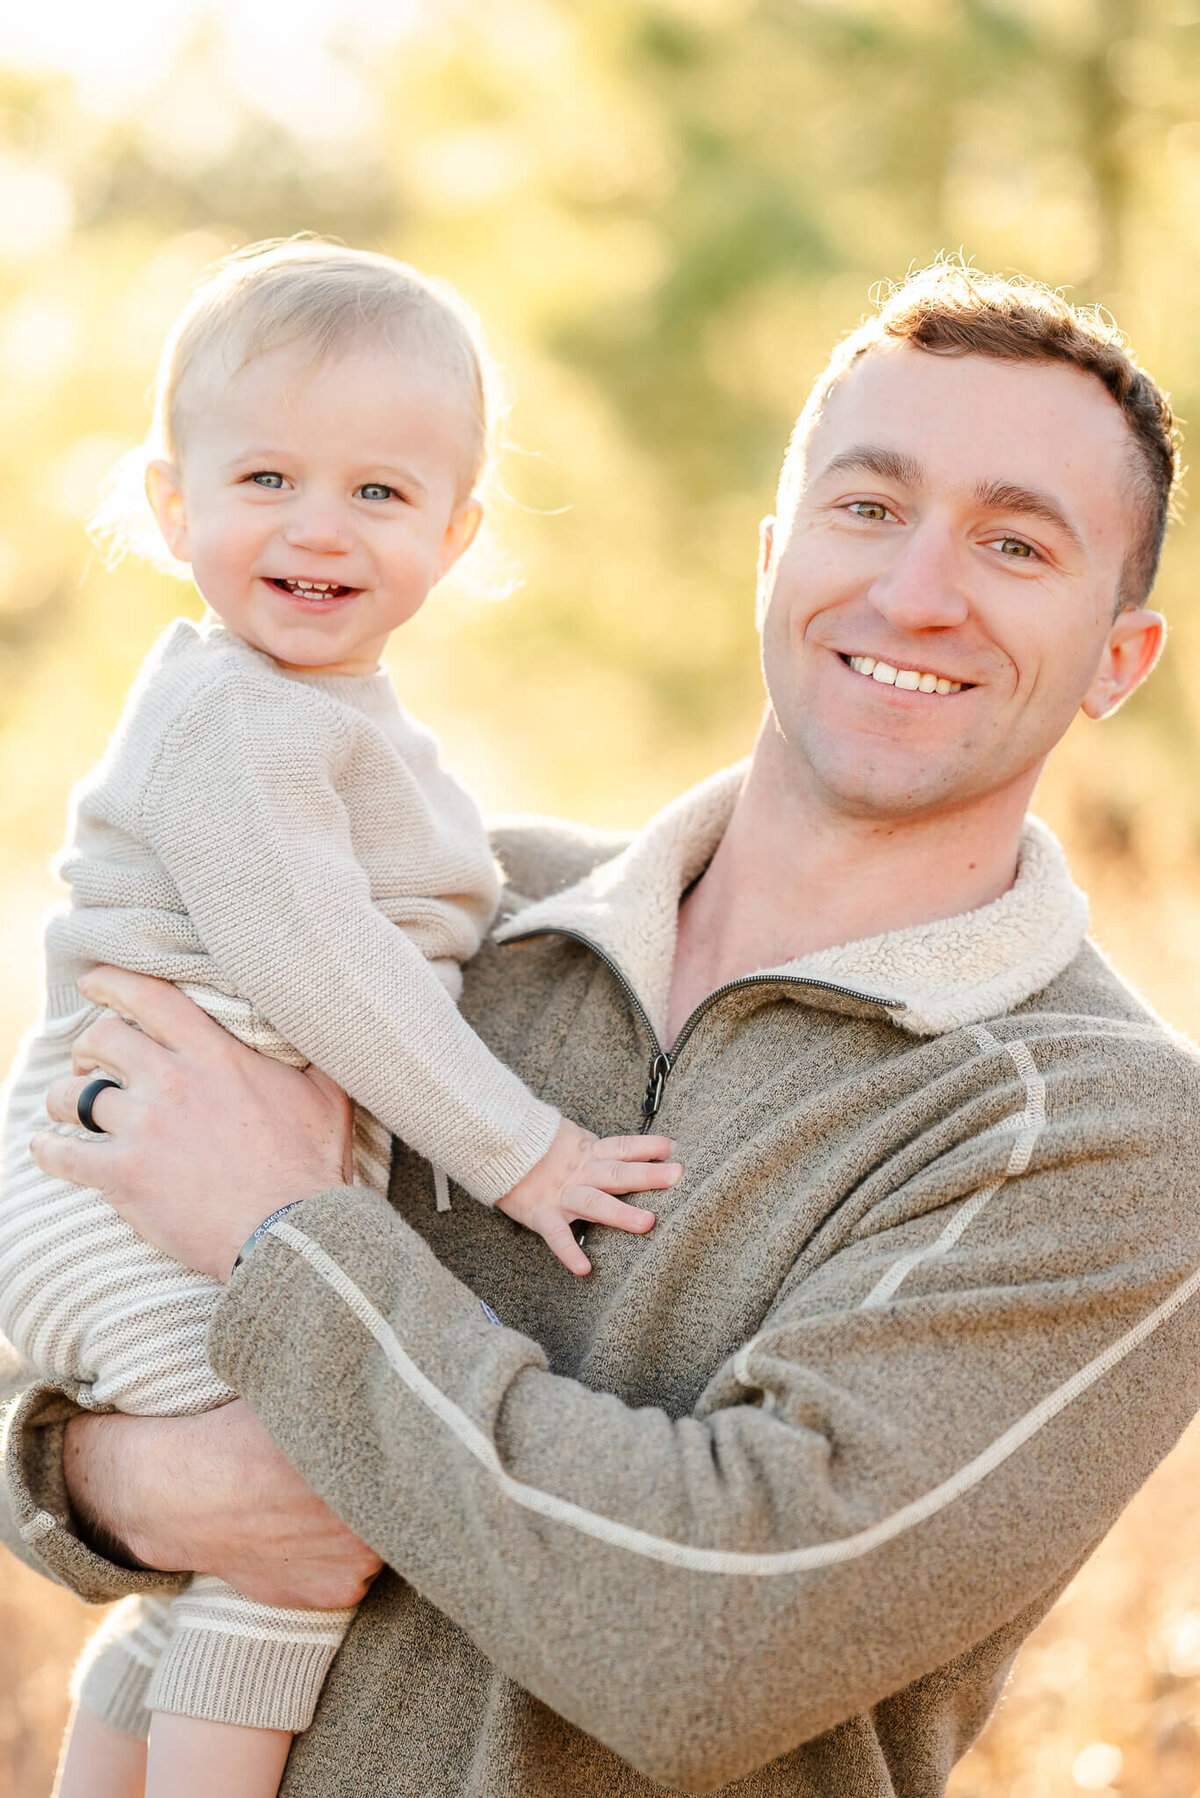 A man wearing a tan sweater holds his toddler son in his arms . The both smile wide while looking at the camera.